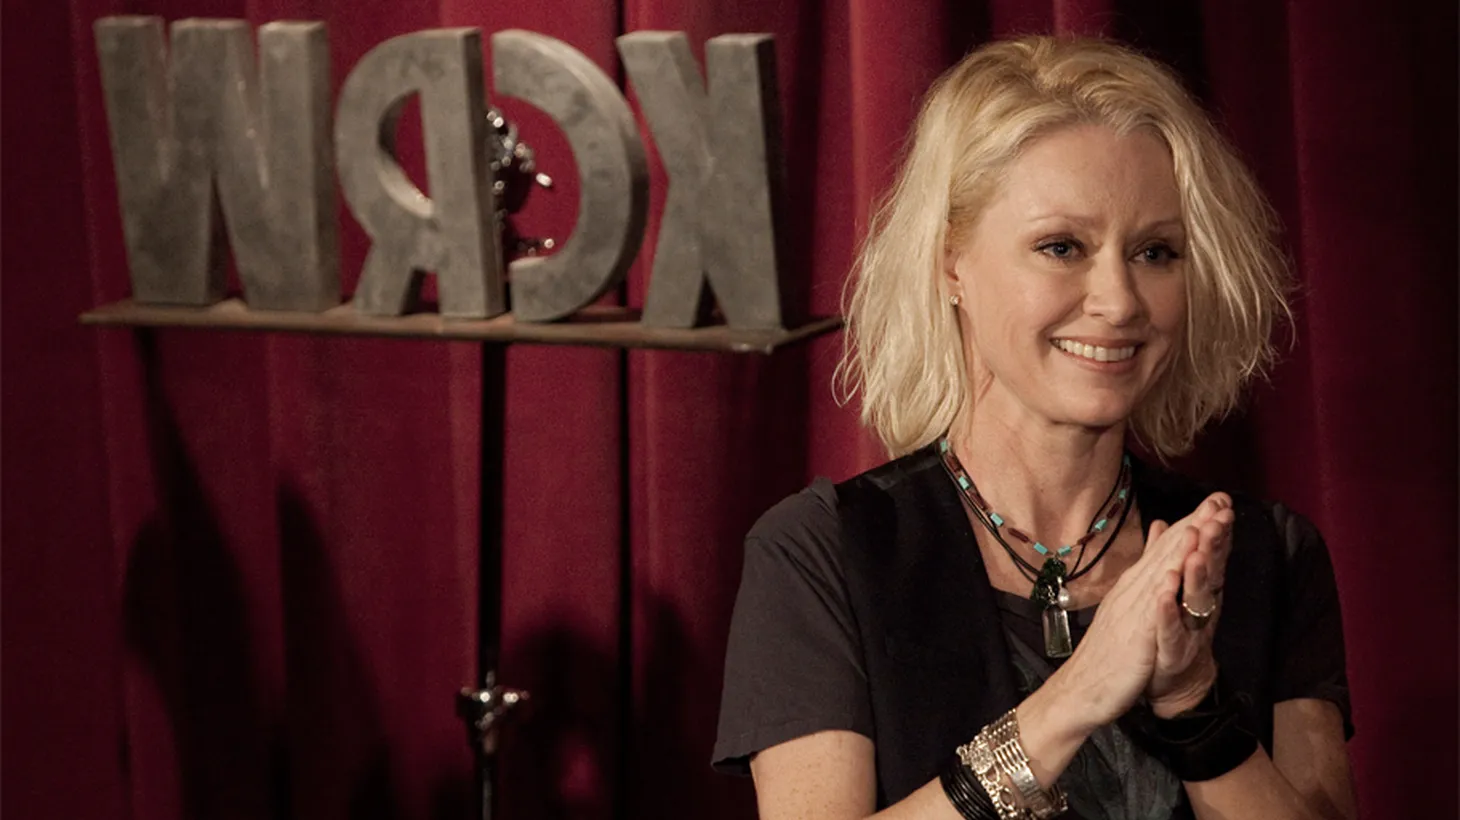 Grammy Award-winning singer Shelby Lynne performed a solo acoustic set in the intimate setting of KCRW's Apogee Sessions in front of a live audience early this year.